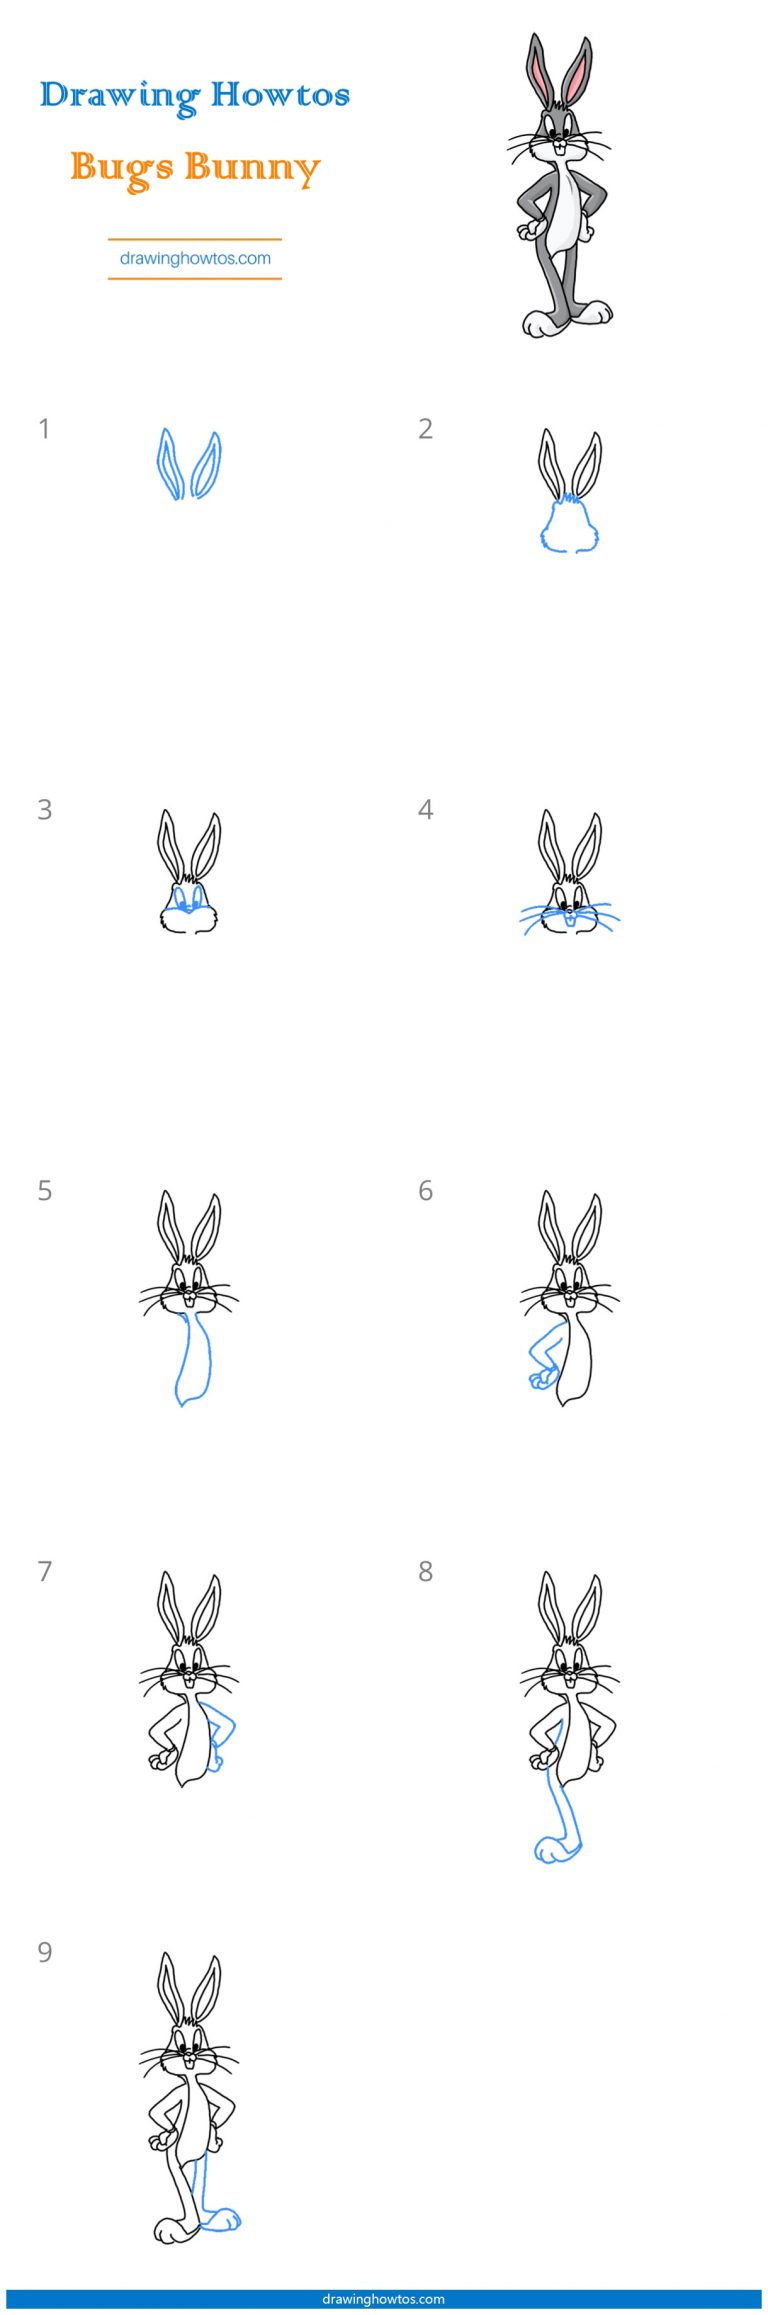 How to Draw a Bugs Bunny - Step by Step Easy Drawing Guides - Drawing